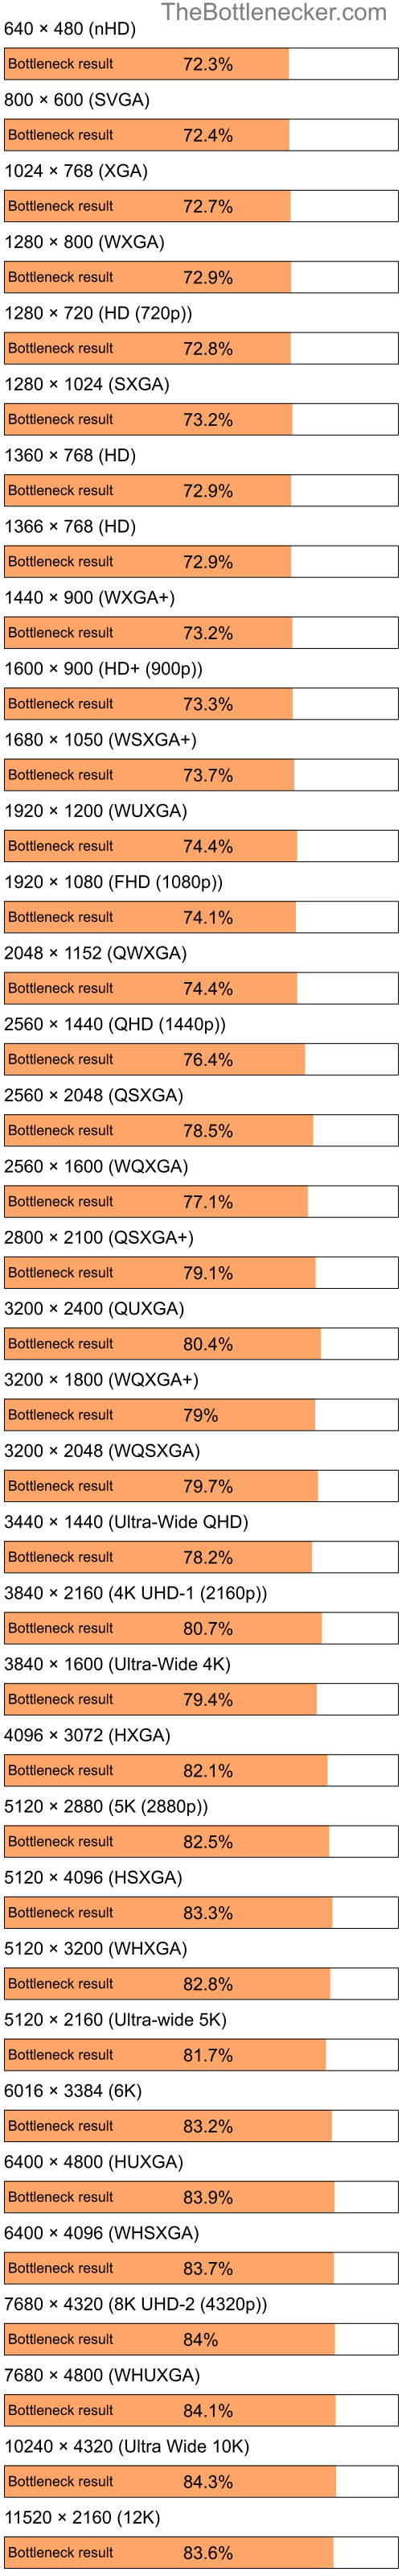 Bottleneck results by resolution for Intel Pentium 4 and NVIDIA GeForce 7200 GS in General Tasks